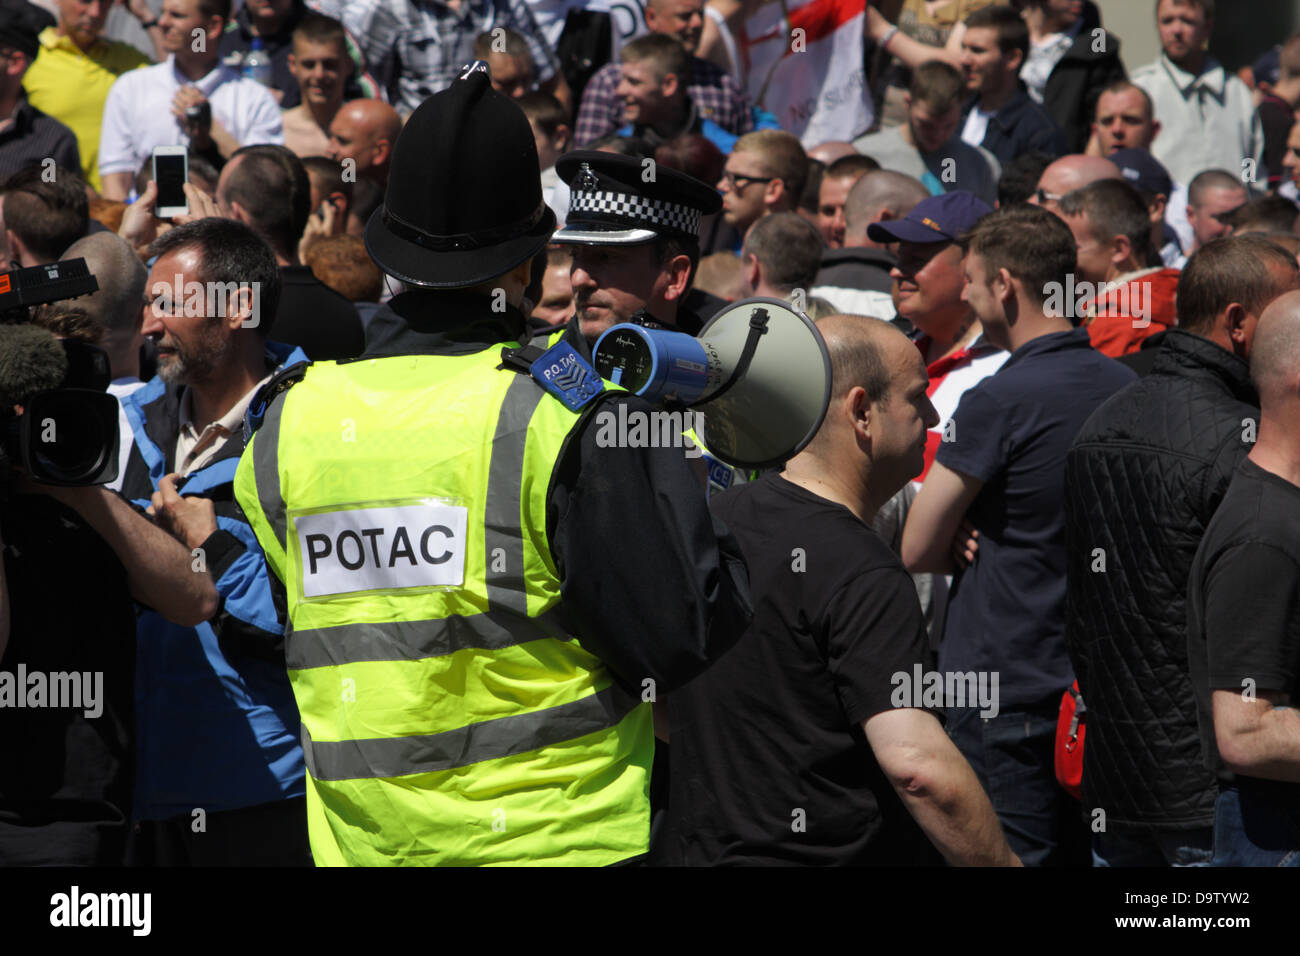 Public Order Tactical Advisor (POTAC) police officer with megaphone at a EDL demonstration in Newcastle upon Tyne, 2013 Stock Photo